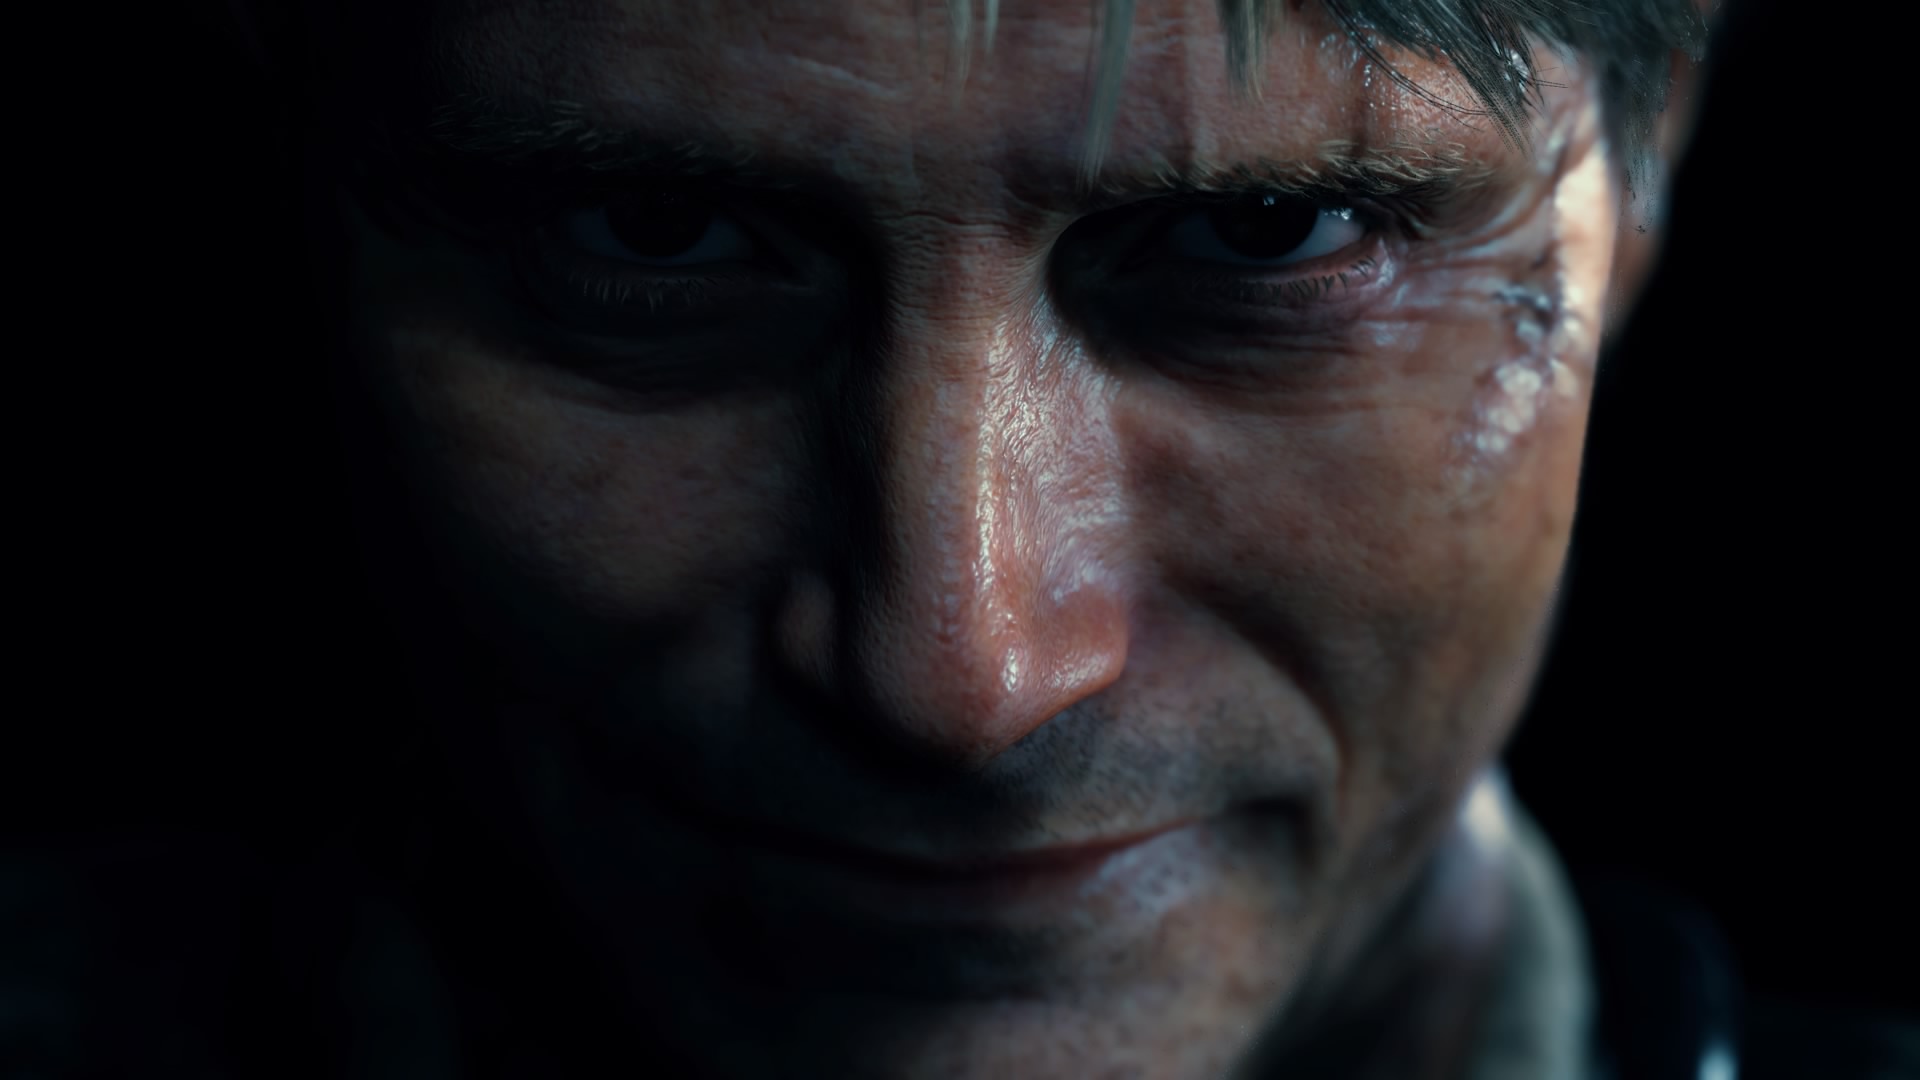 General 1920x1080 Mads Mikkelsen Death Stranding Cliff Unger (Death Stranding) PlayStation 4 Playstation 5 video games Kojima Productions video game characters actor